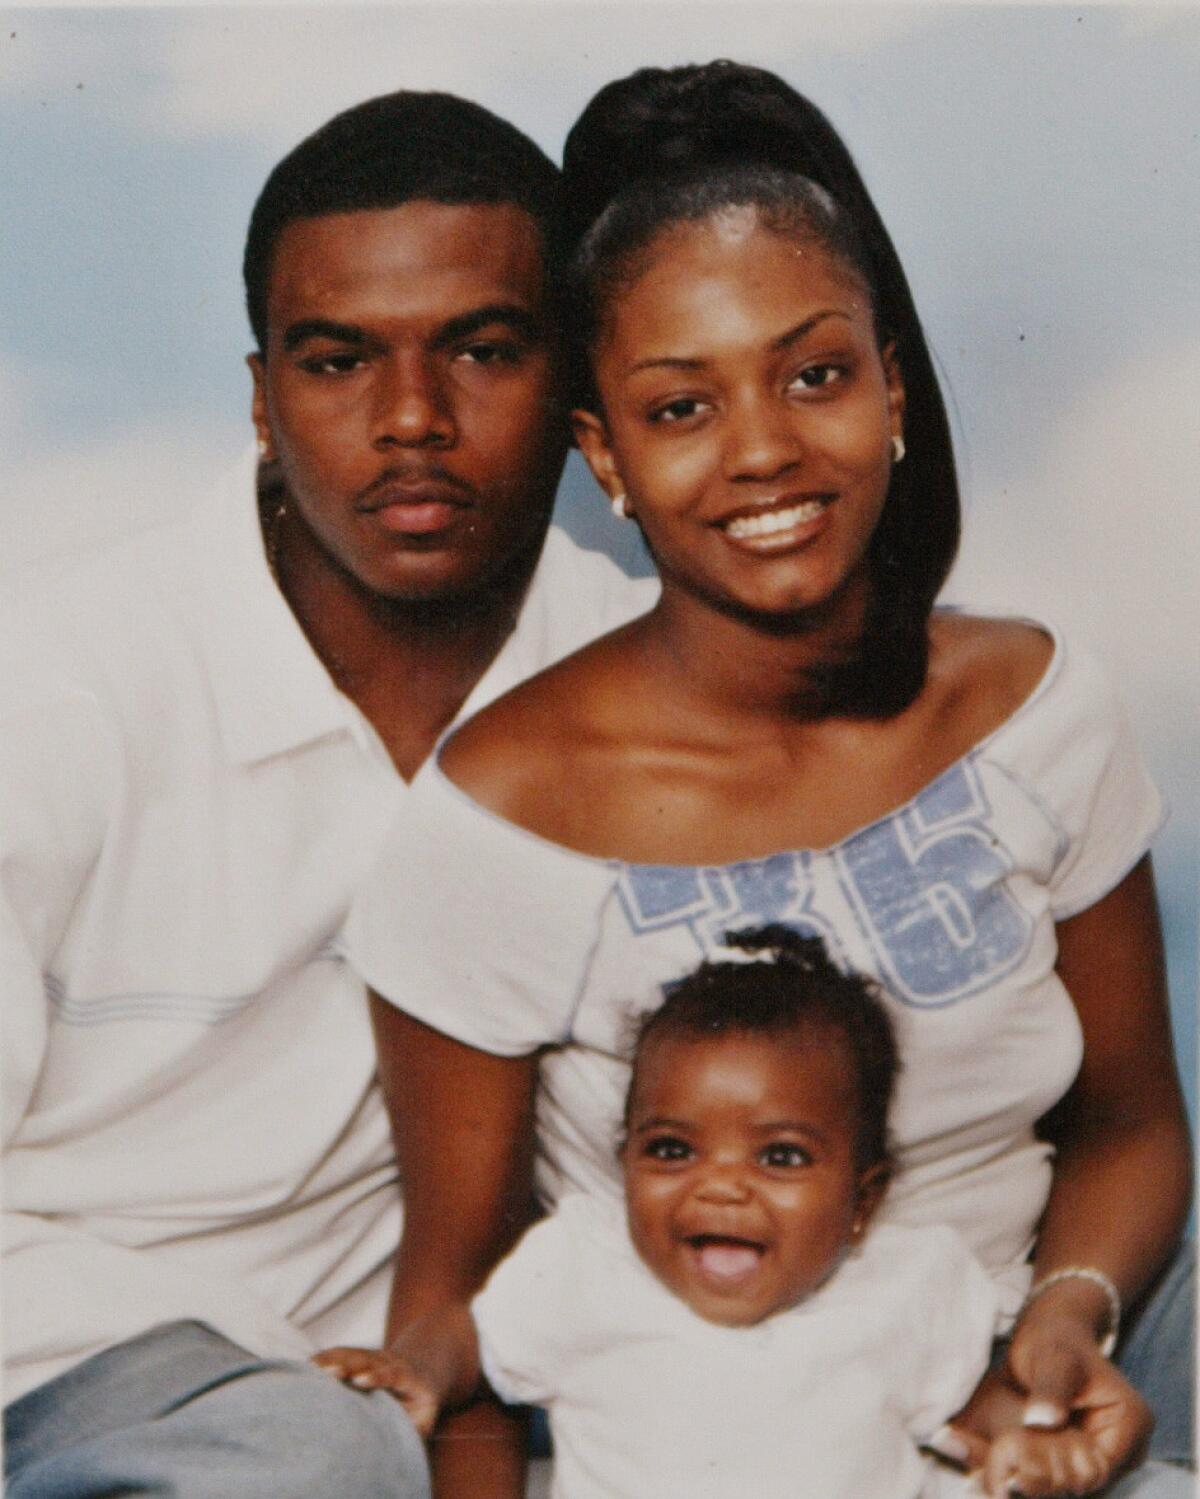 In this undated family photo, Sean Bell and his fiancee, Nicole Paultre, pose with their daughter. (The Daily News via AP)